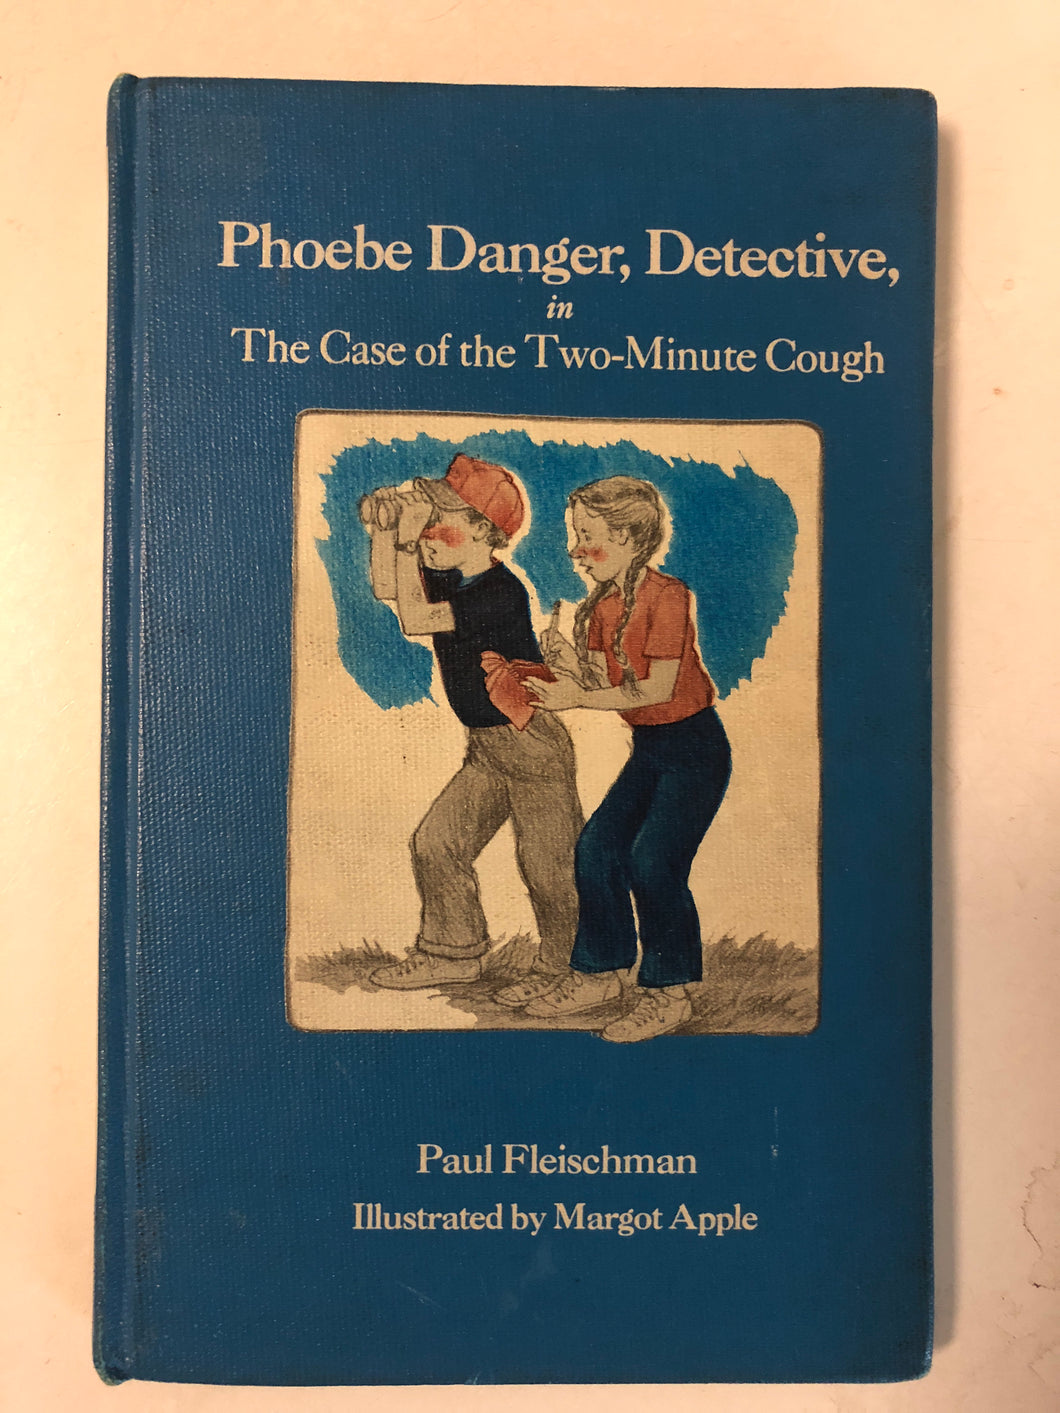 Phoebe Danger, Detective, in The Case of the Two-Minute Cough - Slick Cat Books 